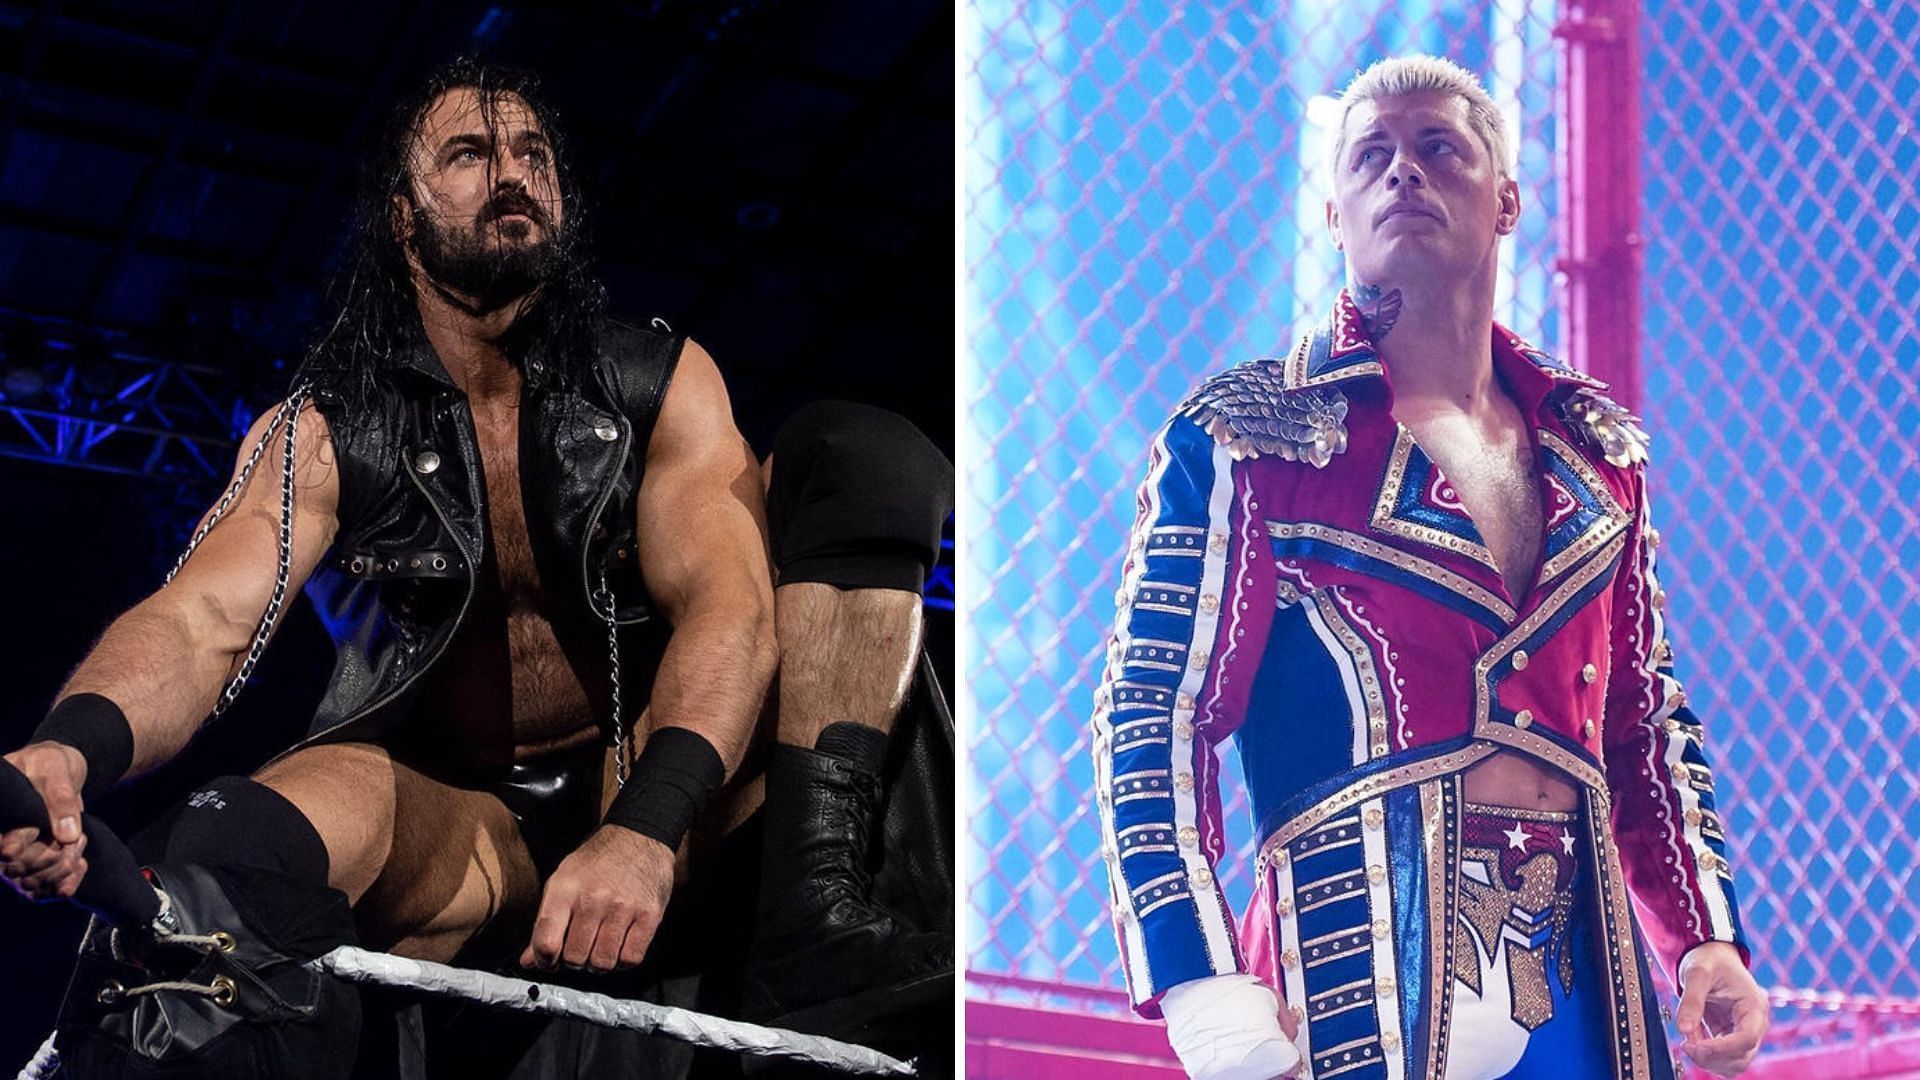 Both Drew McIntyre and Cody Rhodes are determined to win the Royal Rumble